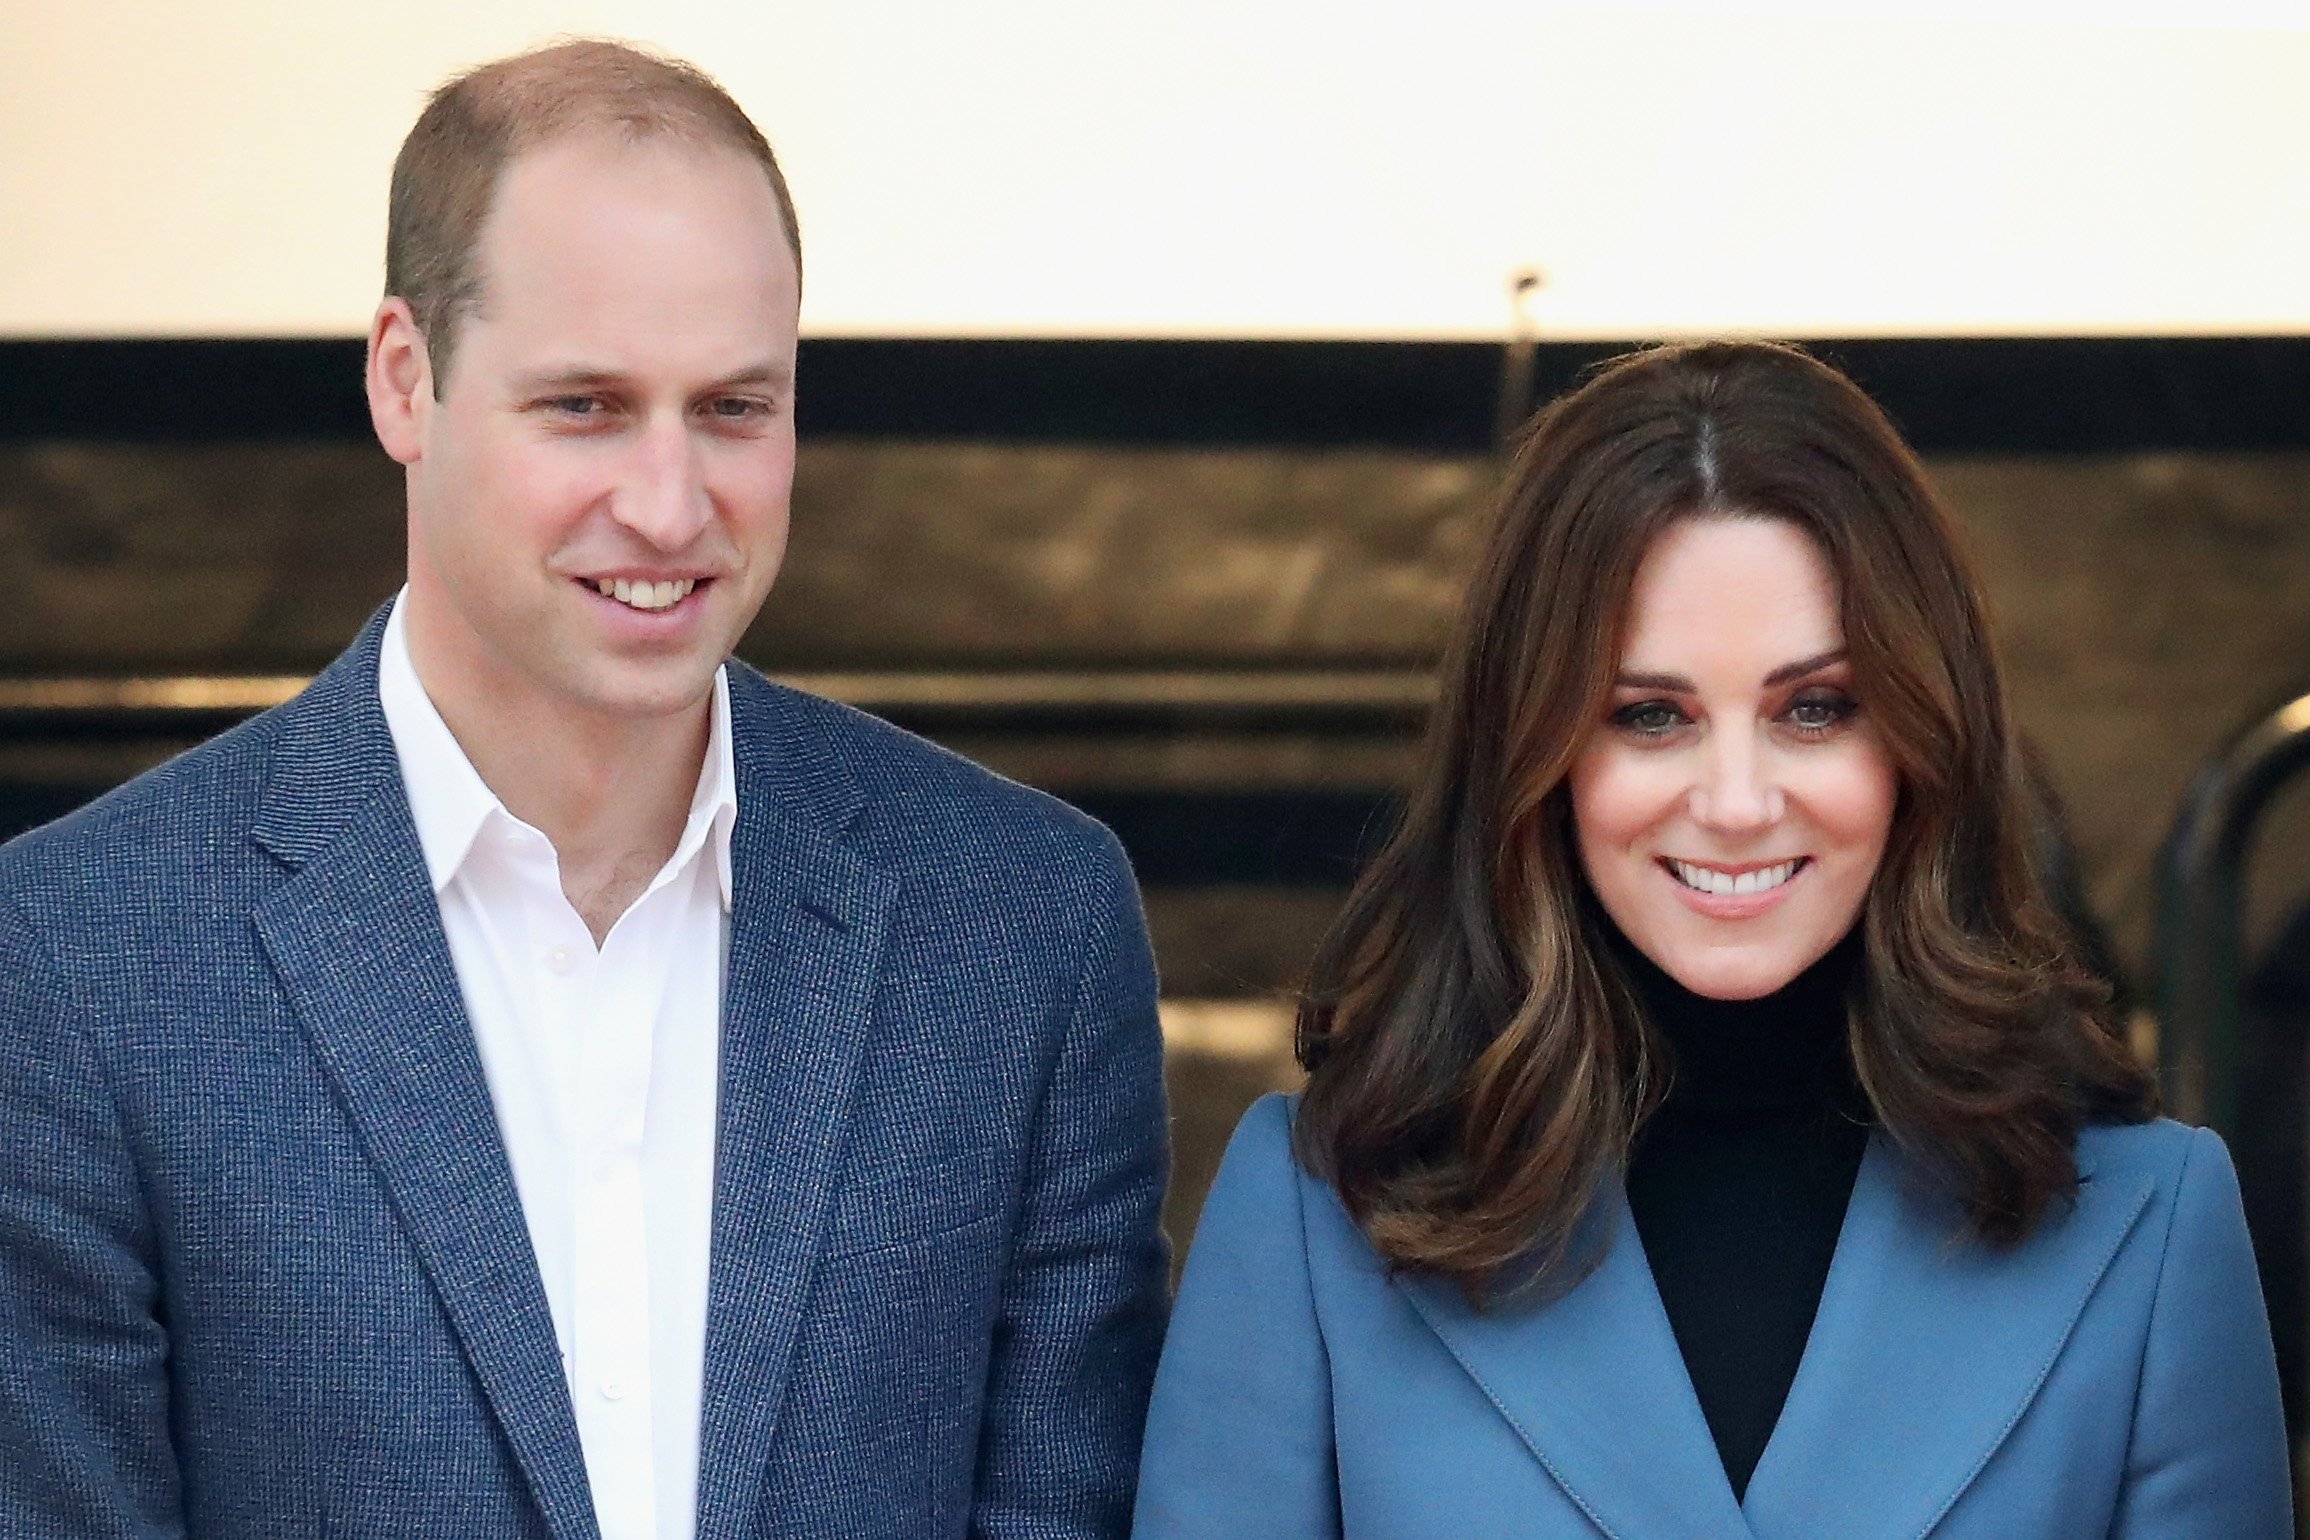 Prince William, Duke of Cambridge and Catherine, Duchess of Cambridge attend the Coach Core graduation ceremony for more than 150 Coach Core apprentices at The London Stadium on October 18, 2017 | Photo: Getty Images